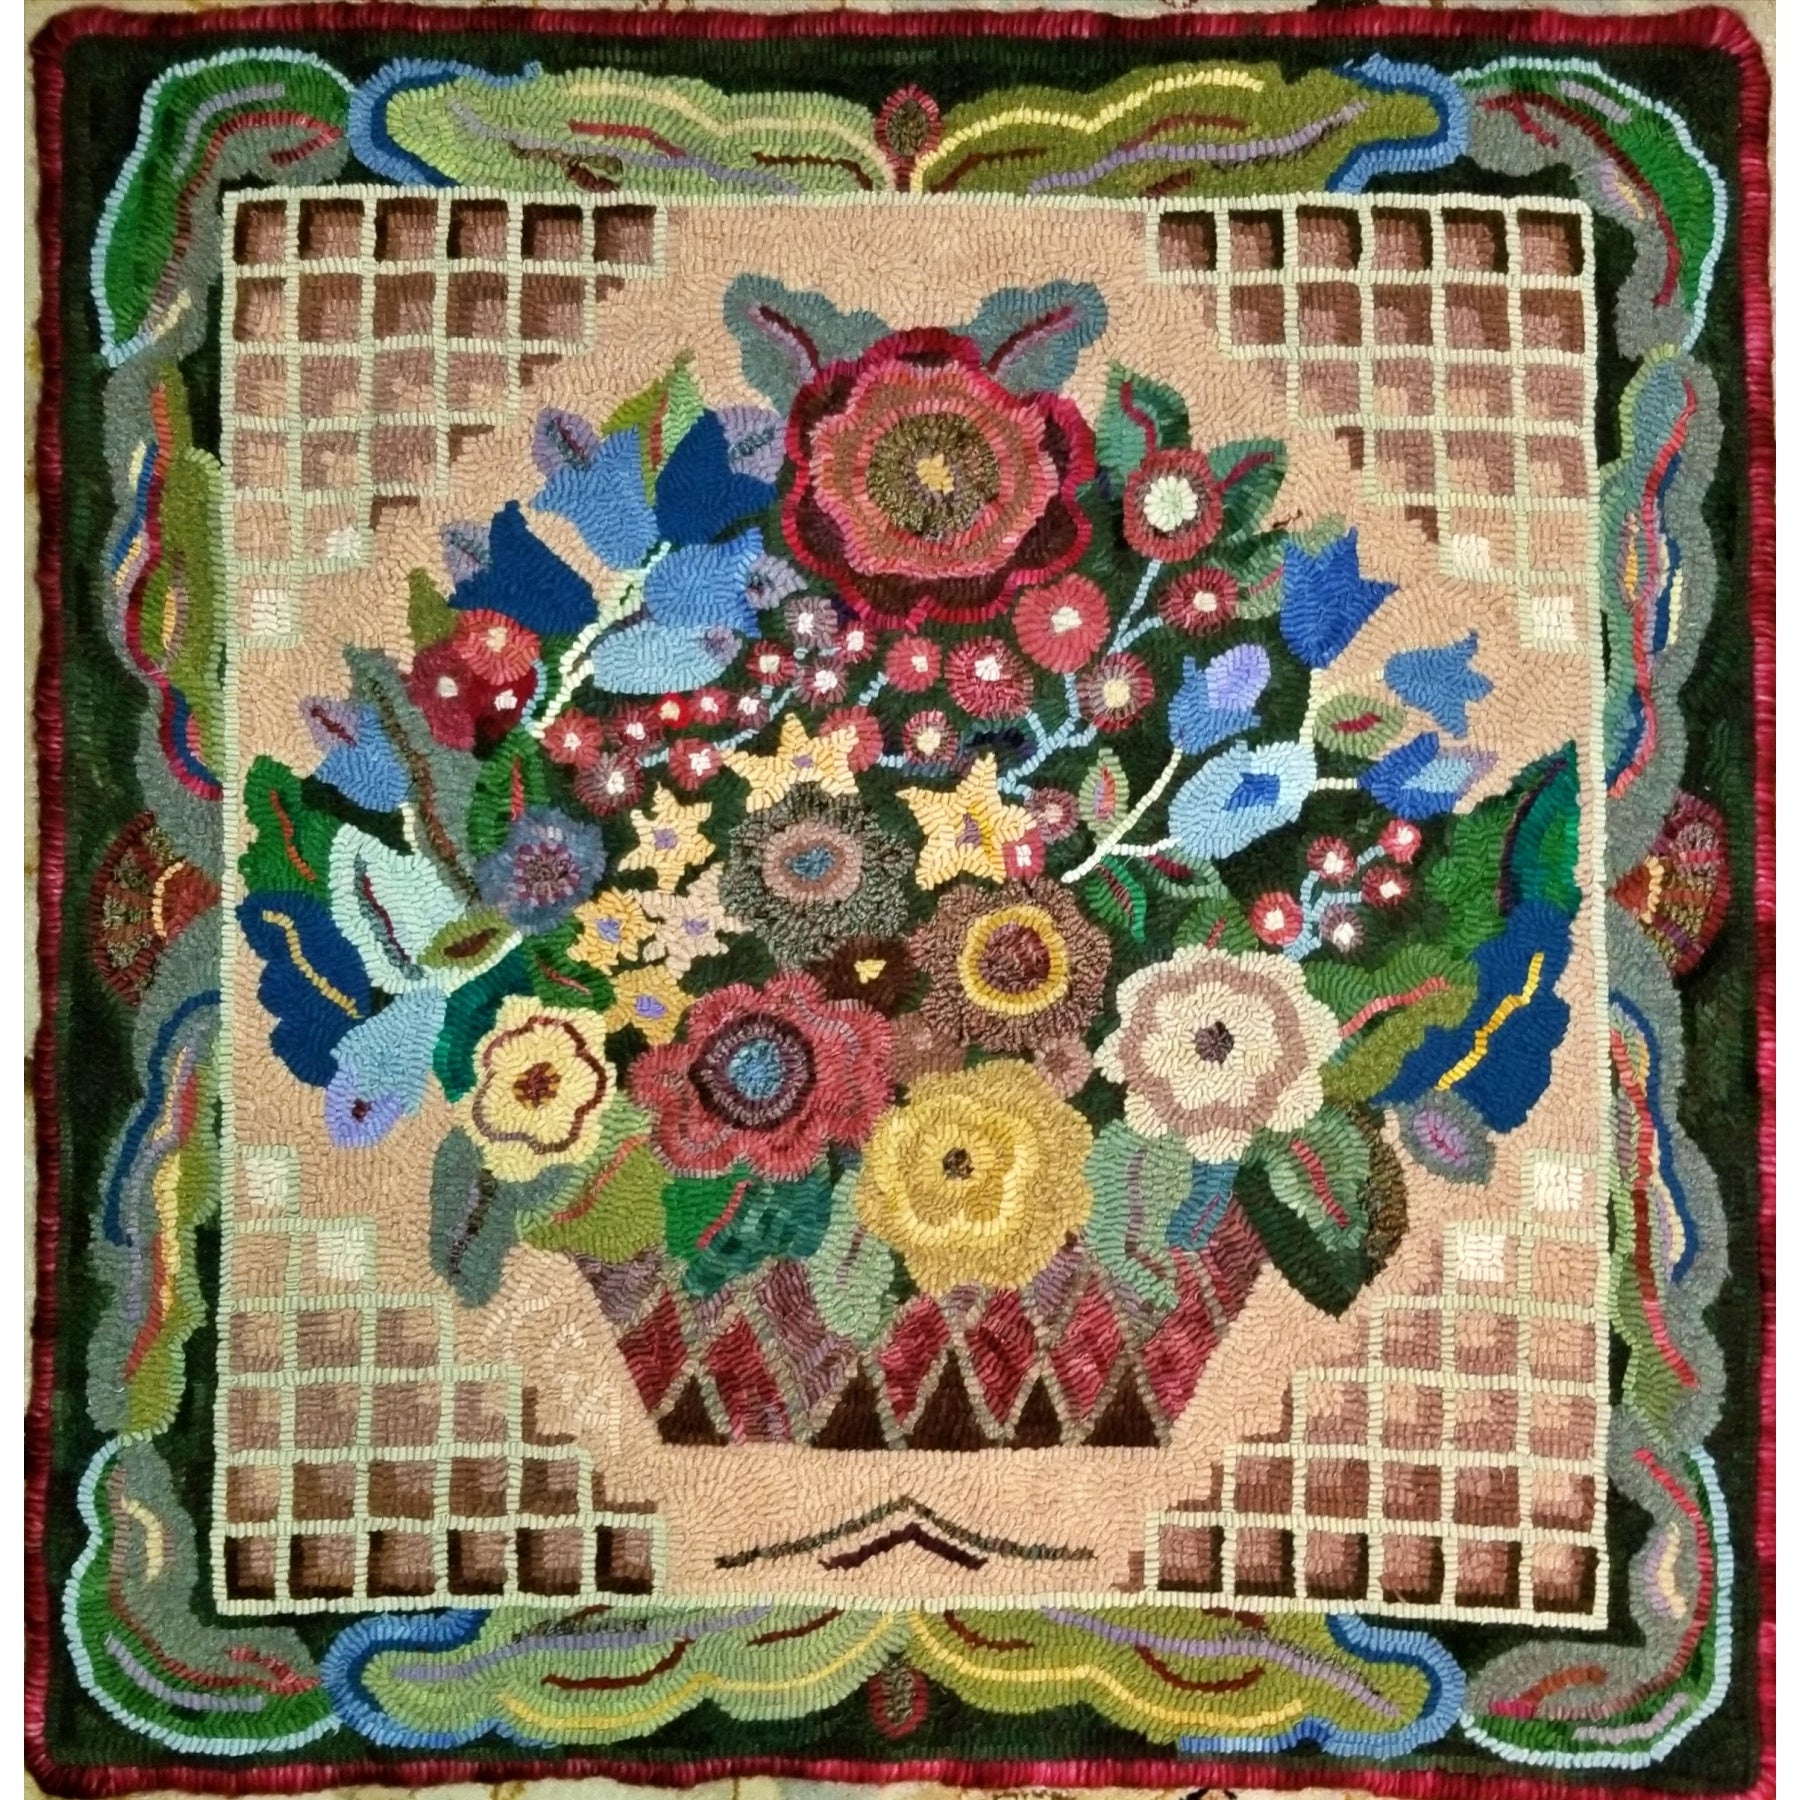 Antique Floral Adapation, rug hooked by Kim Adams